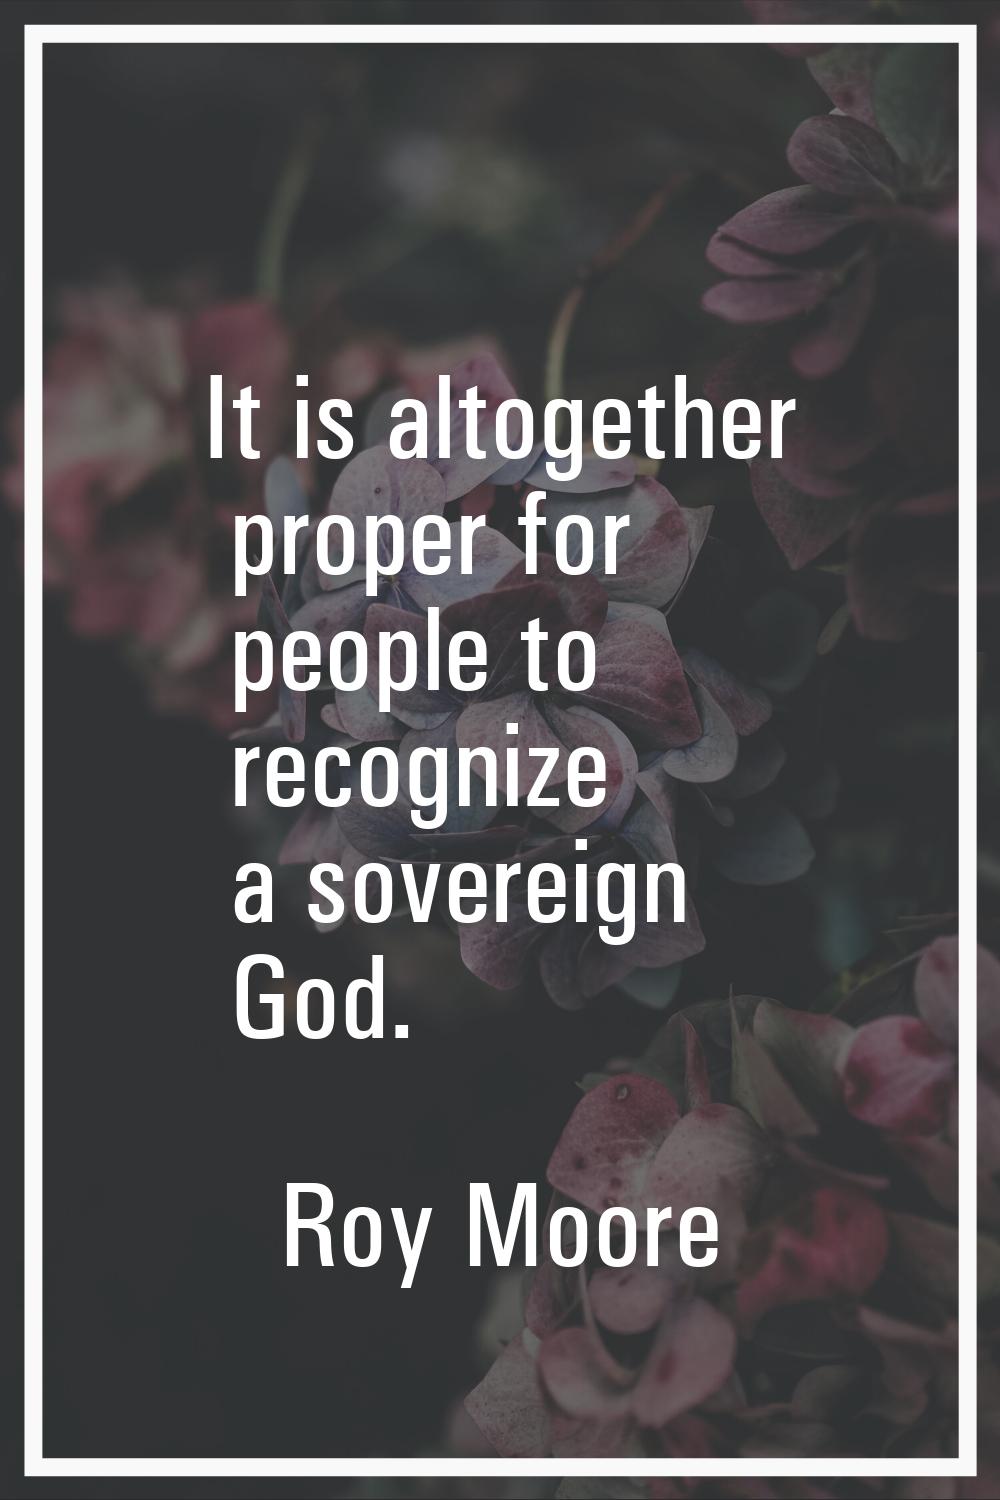 It is altogether proper for people to recognize a sovereign God.